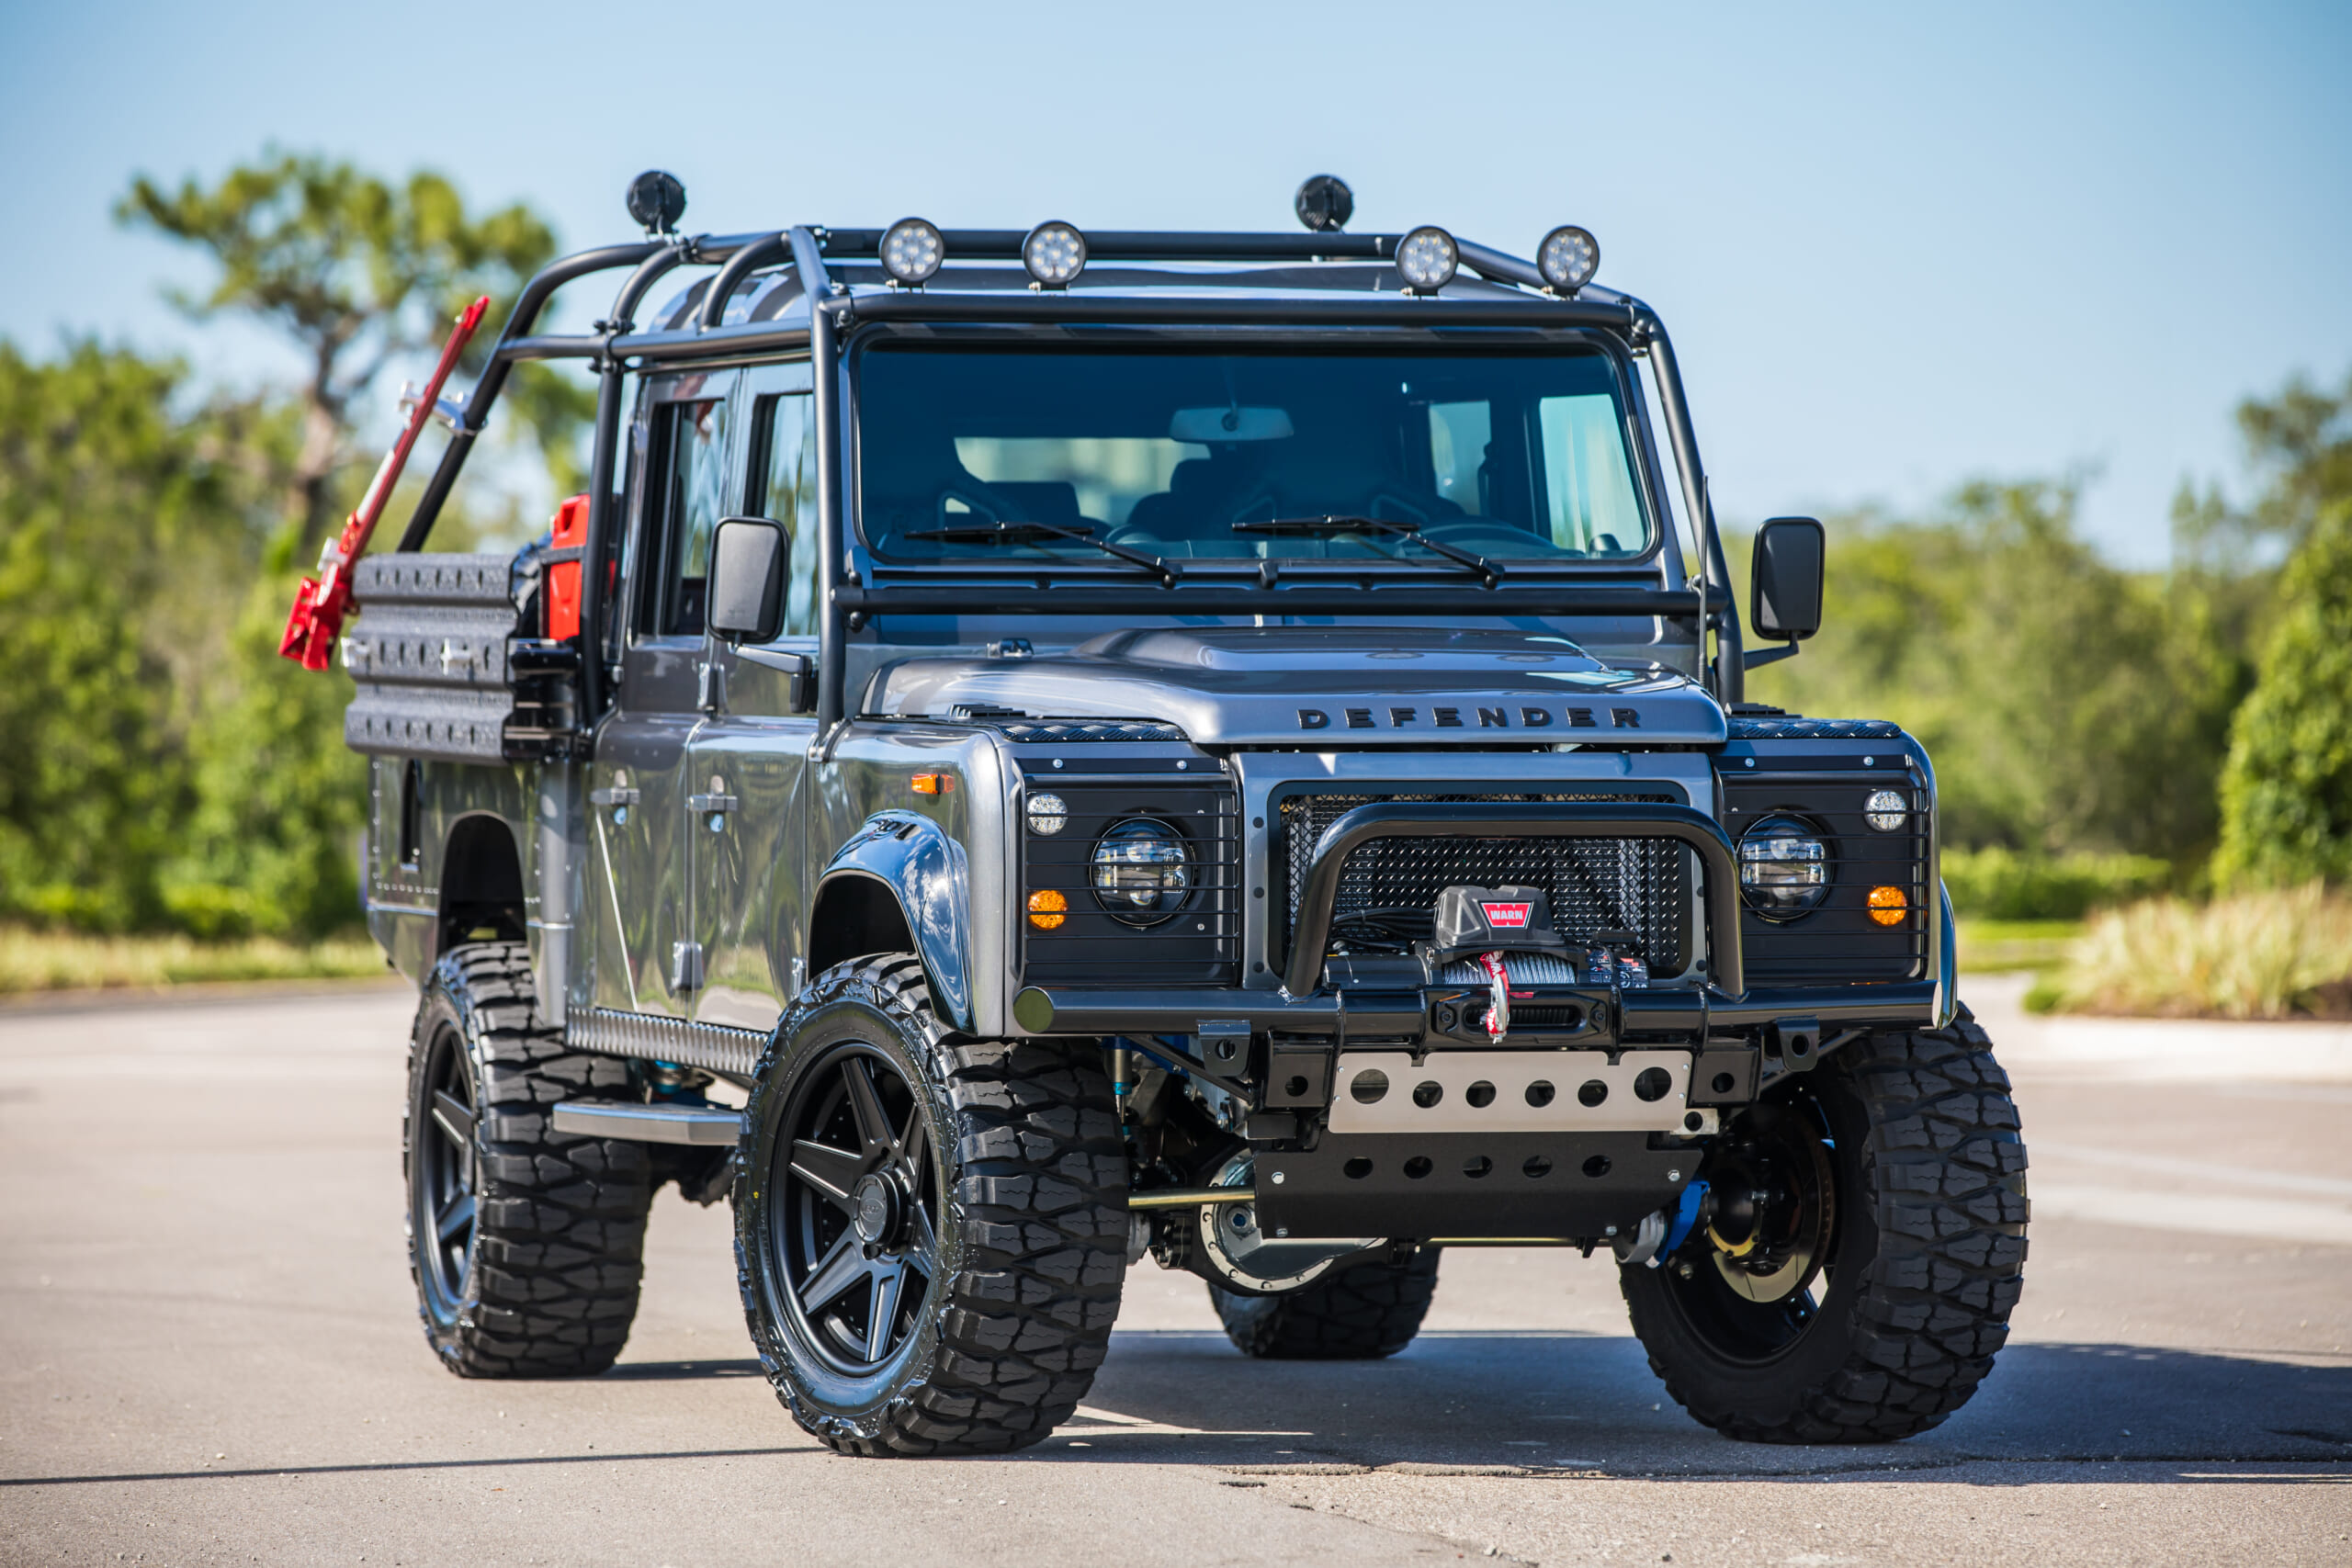 Few Things Earth Are Cooler Than Custom Land Rover Defenders, And These Are The 5 Coolest - Maxim